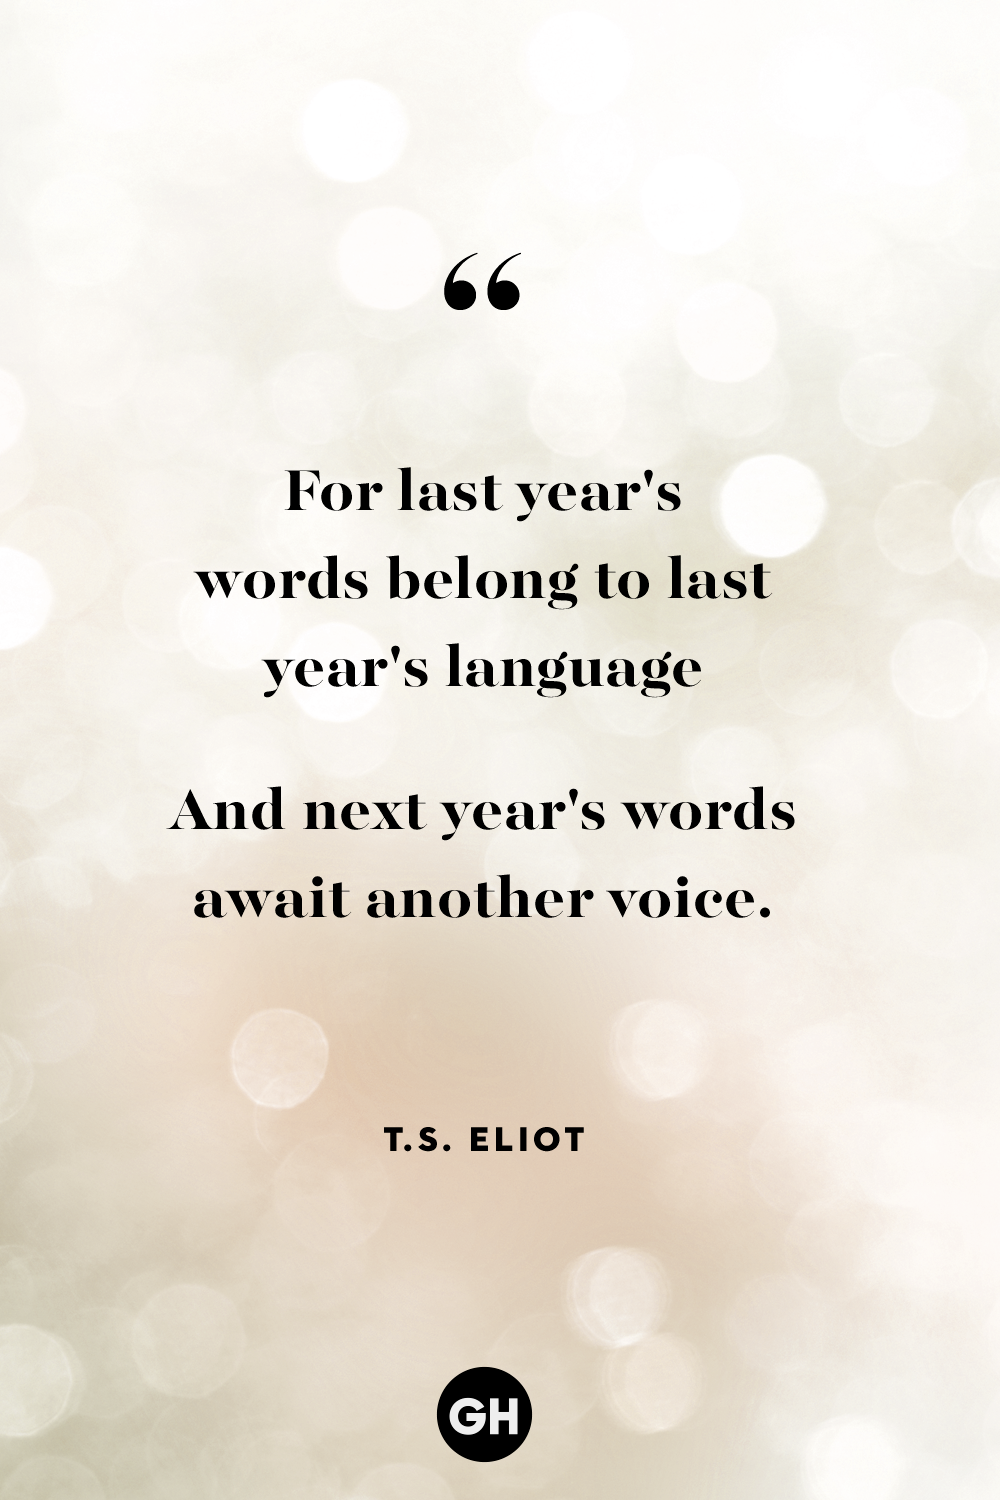 65 Best New Year Quotes 2021 - Inspiring NYE End of Year Sayings